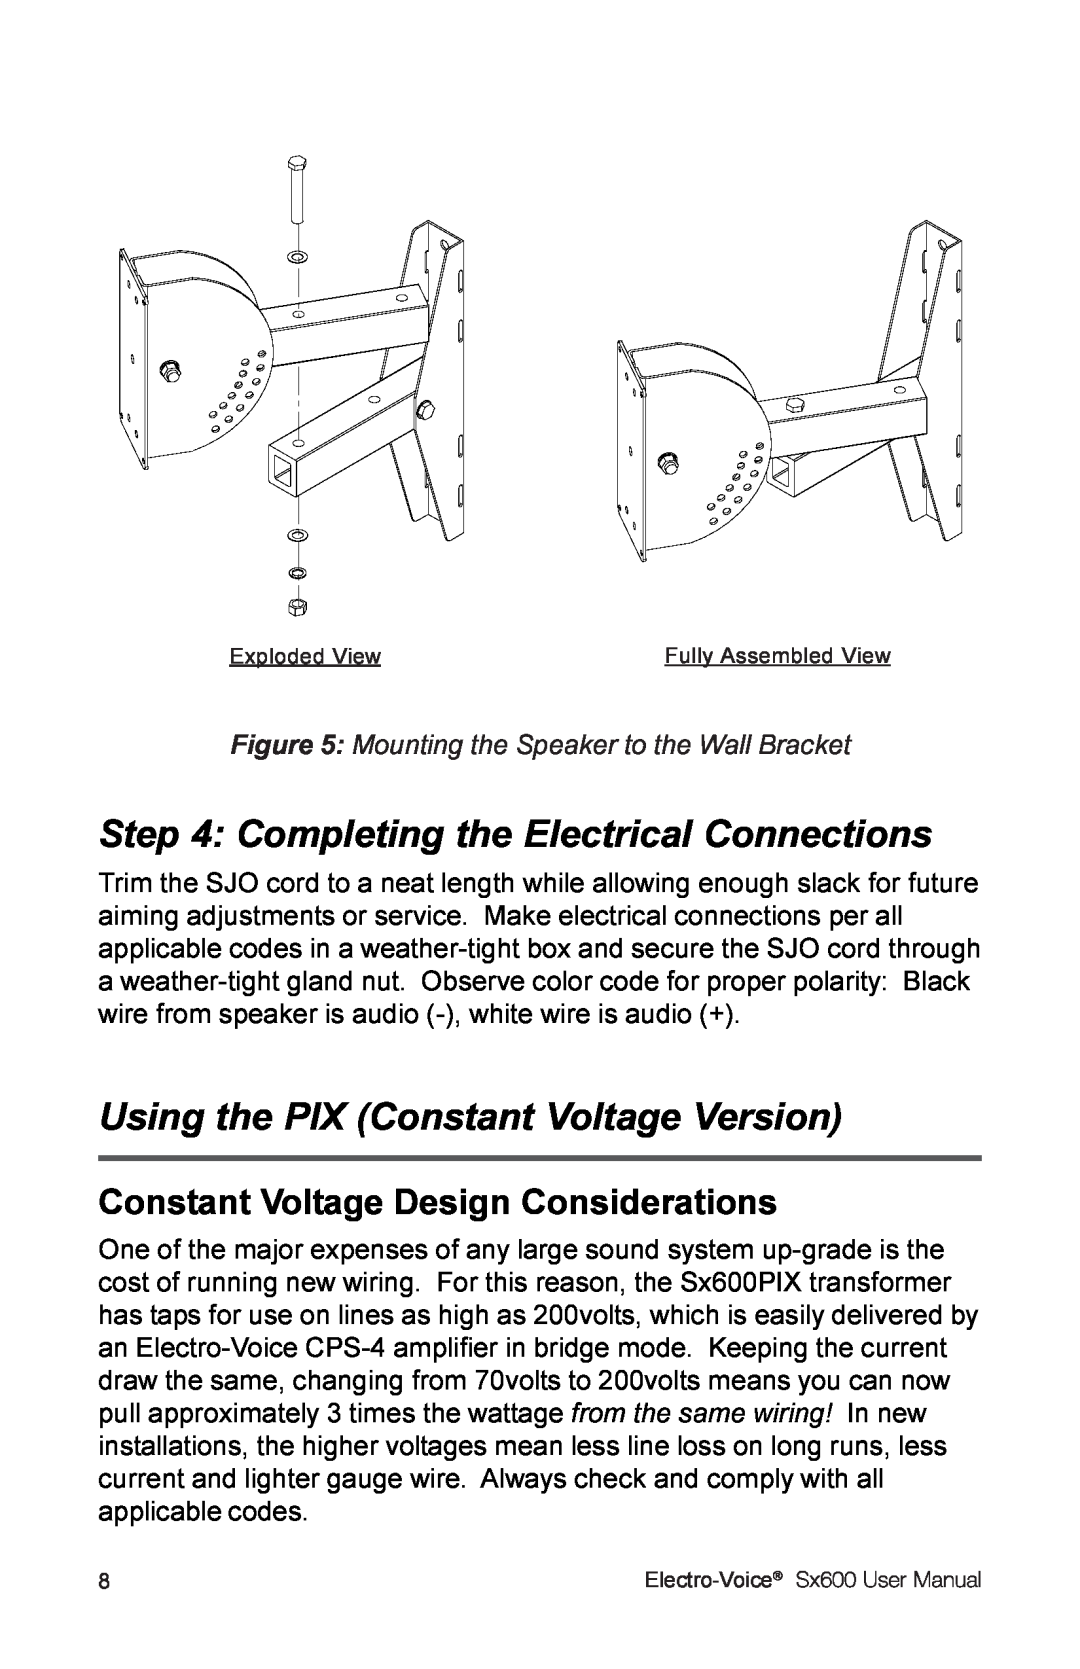 Electro-Voice Sx600 user manual Completing the Electrical Connections, Using the PIX Constant Voltage Version 